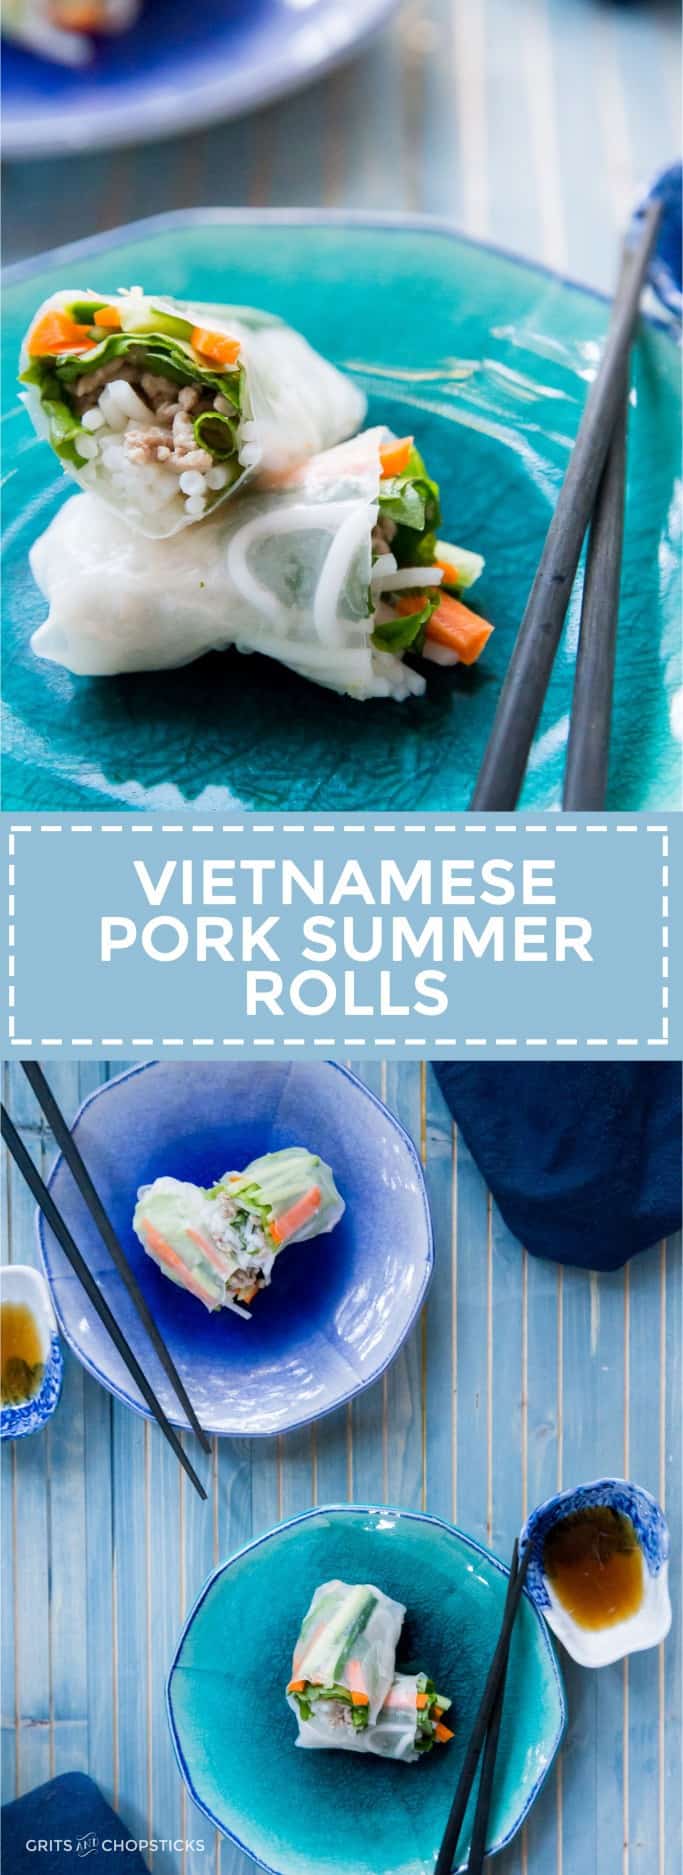 Summer might be over, but Vietnamese pork summer rolls are an easy weeknight meal year-round. Try it tonight!